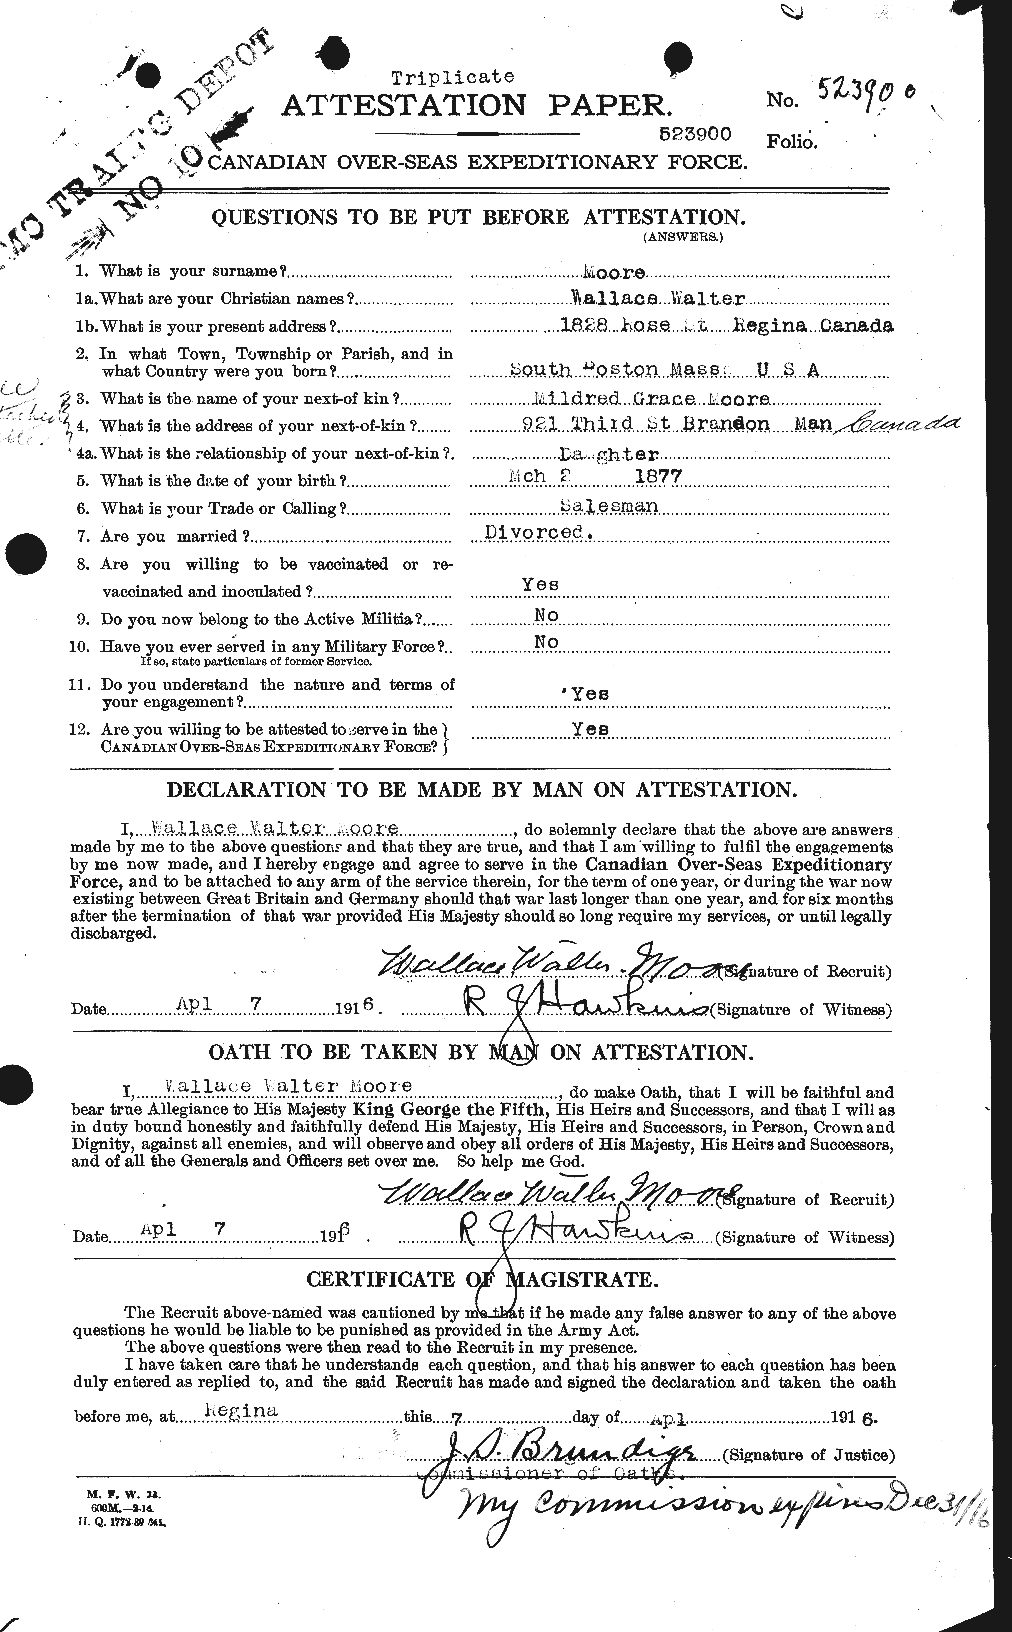 Personnel Records of the First World War - CEF 505688a